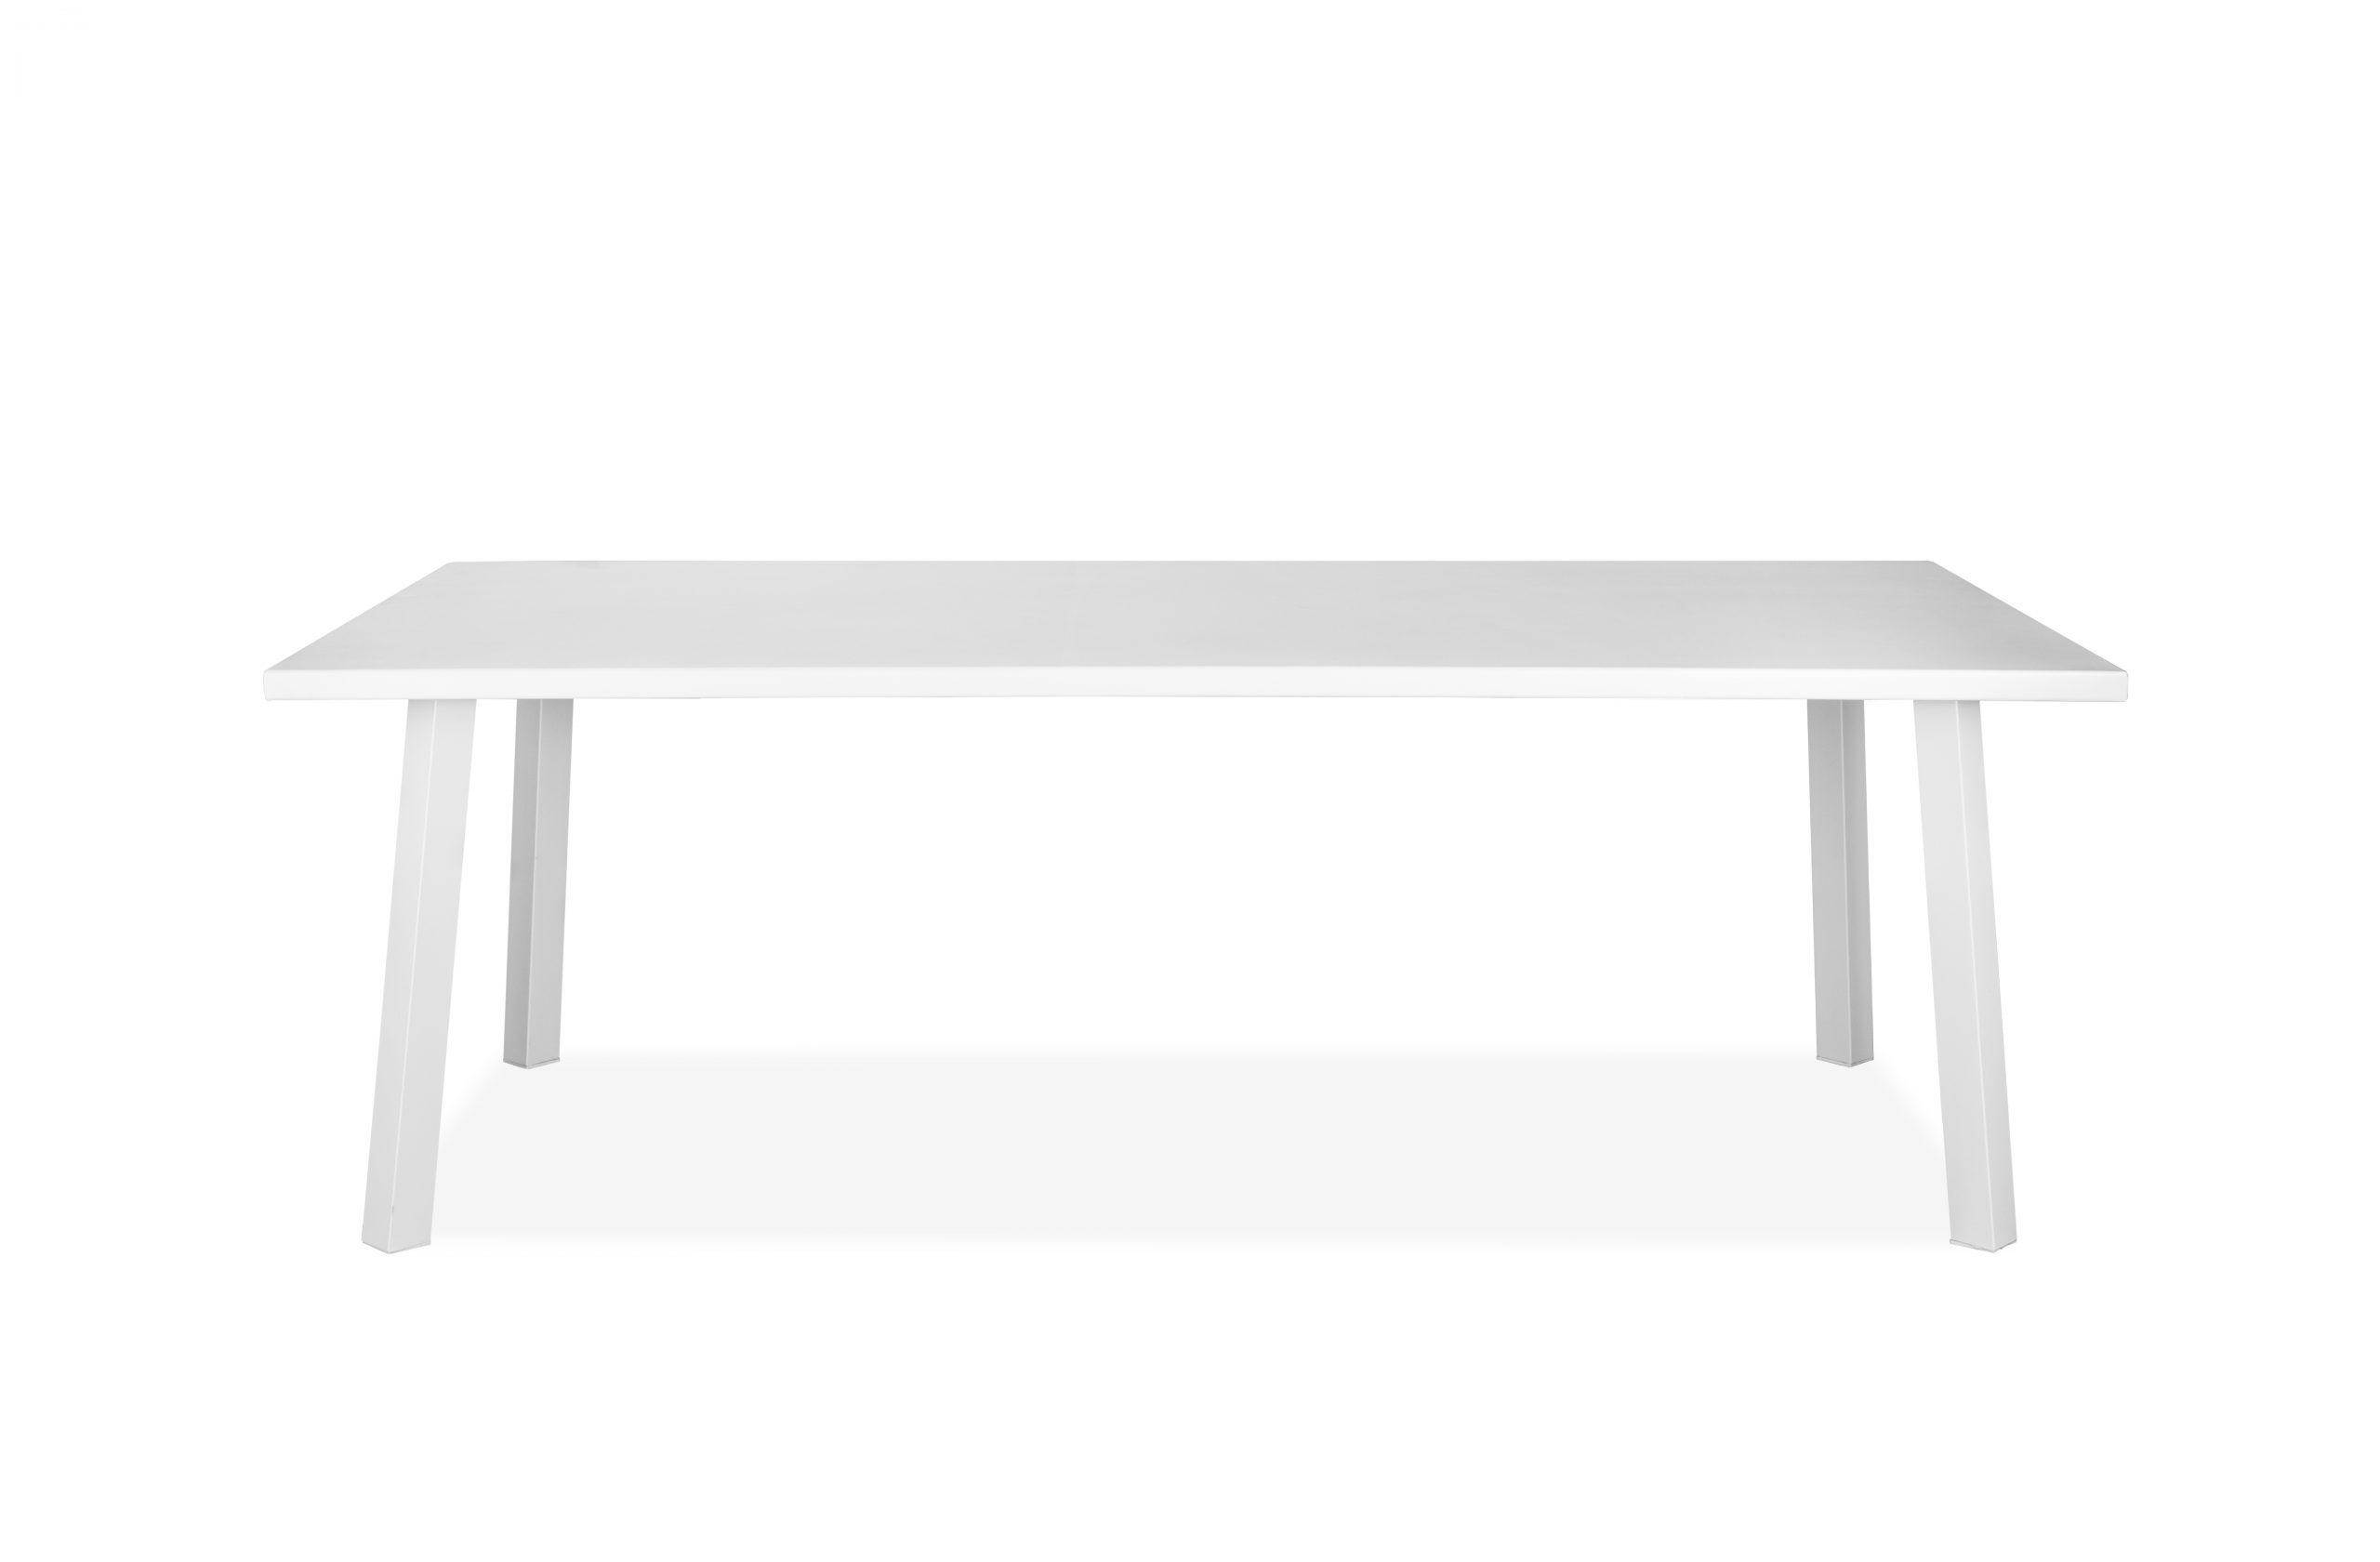 Contemporary Outdoor Dining Table DT1593-WHT Rio DT1593-WHT in White 